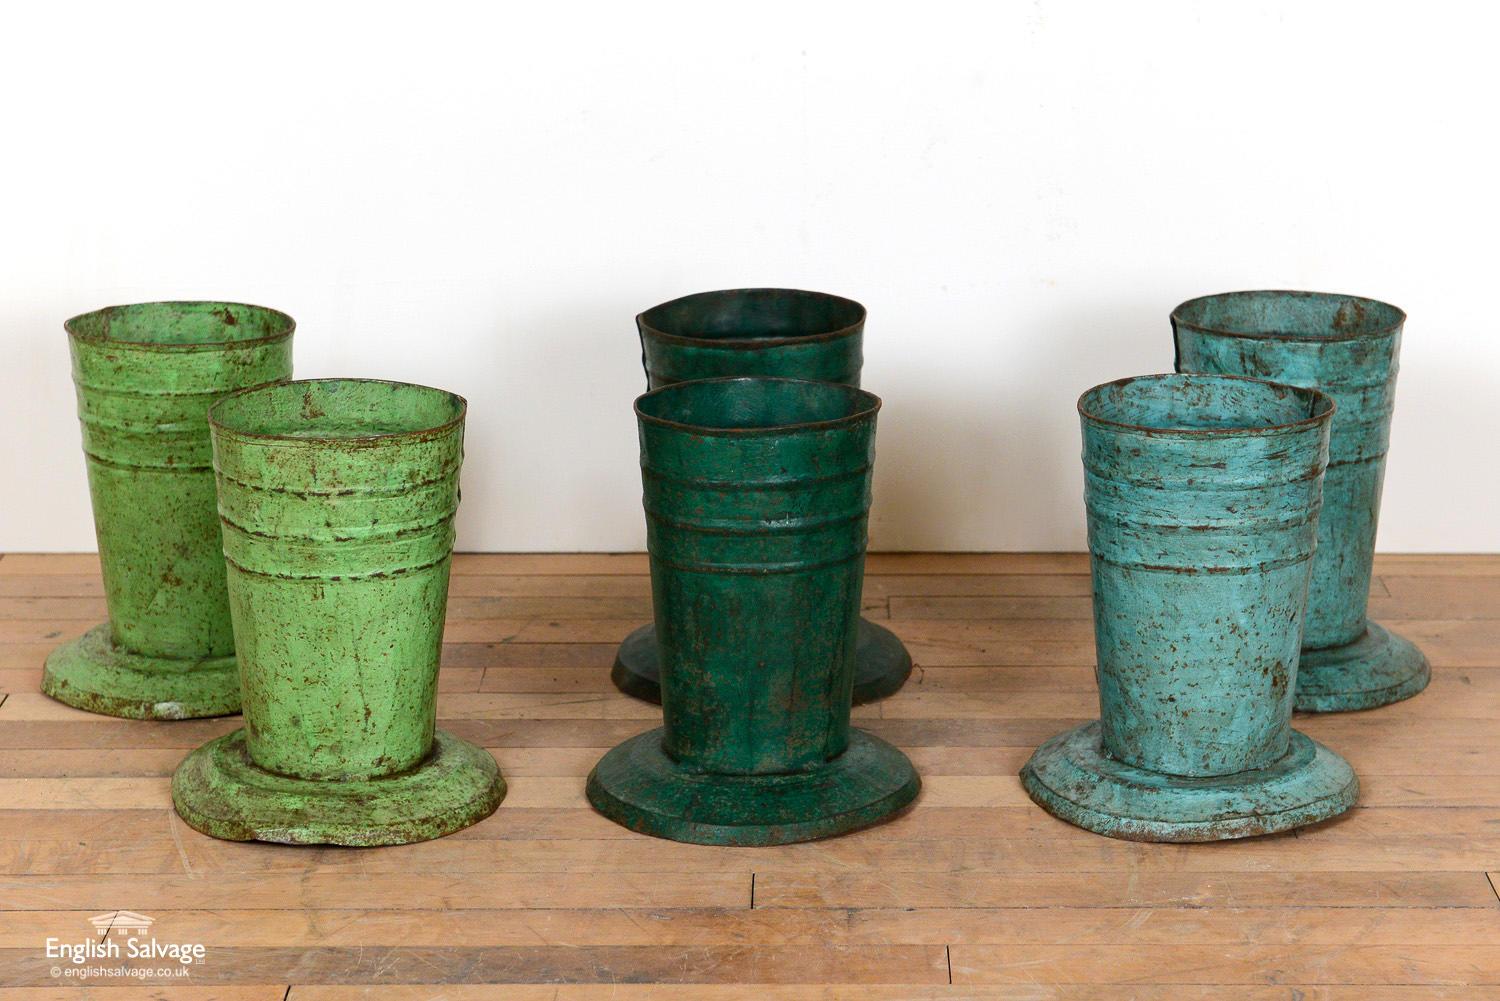 Charming rustic vases naively made from recycled metal, in light green, bottle green or turquoise. They are of a simple design with treble beading to the upper part and an appealing patina with some surface rust.